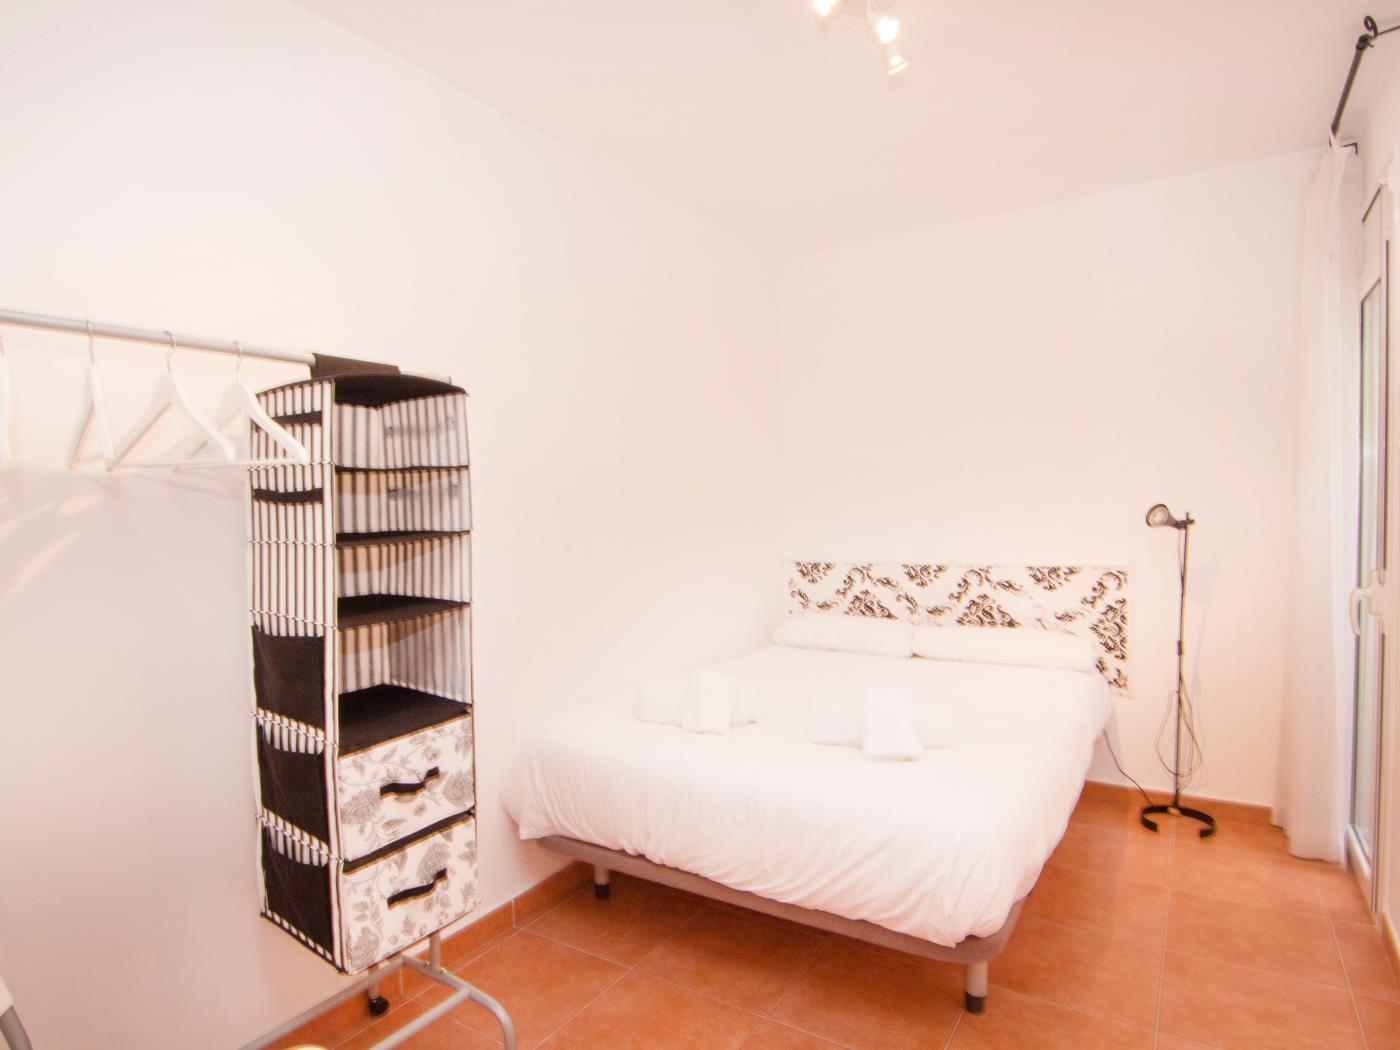 CHILL OUT BY BLAUSITGES Amazing duplex with large private terrace in Sitges. in SITGES